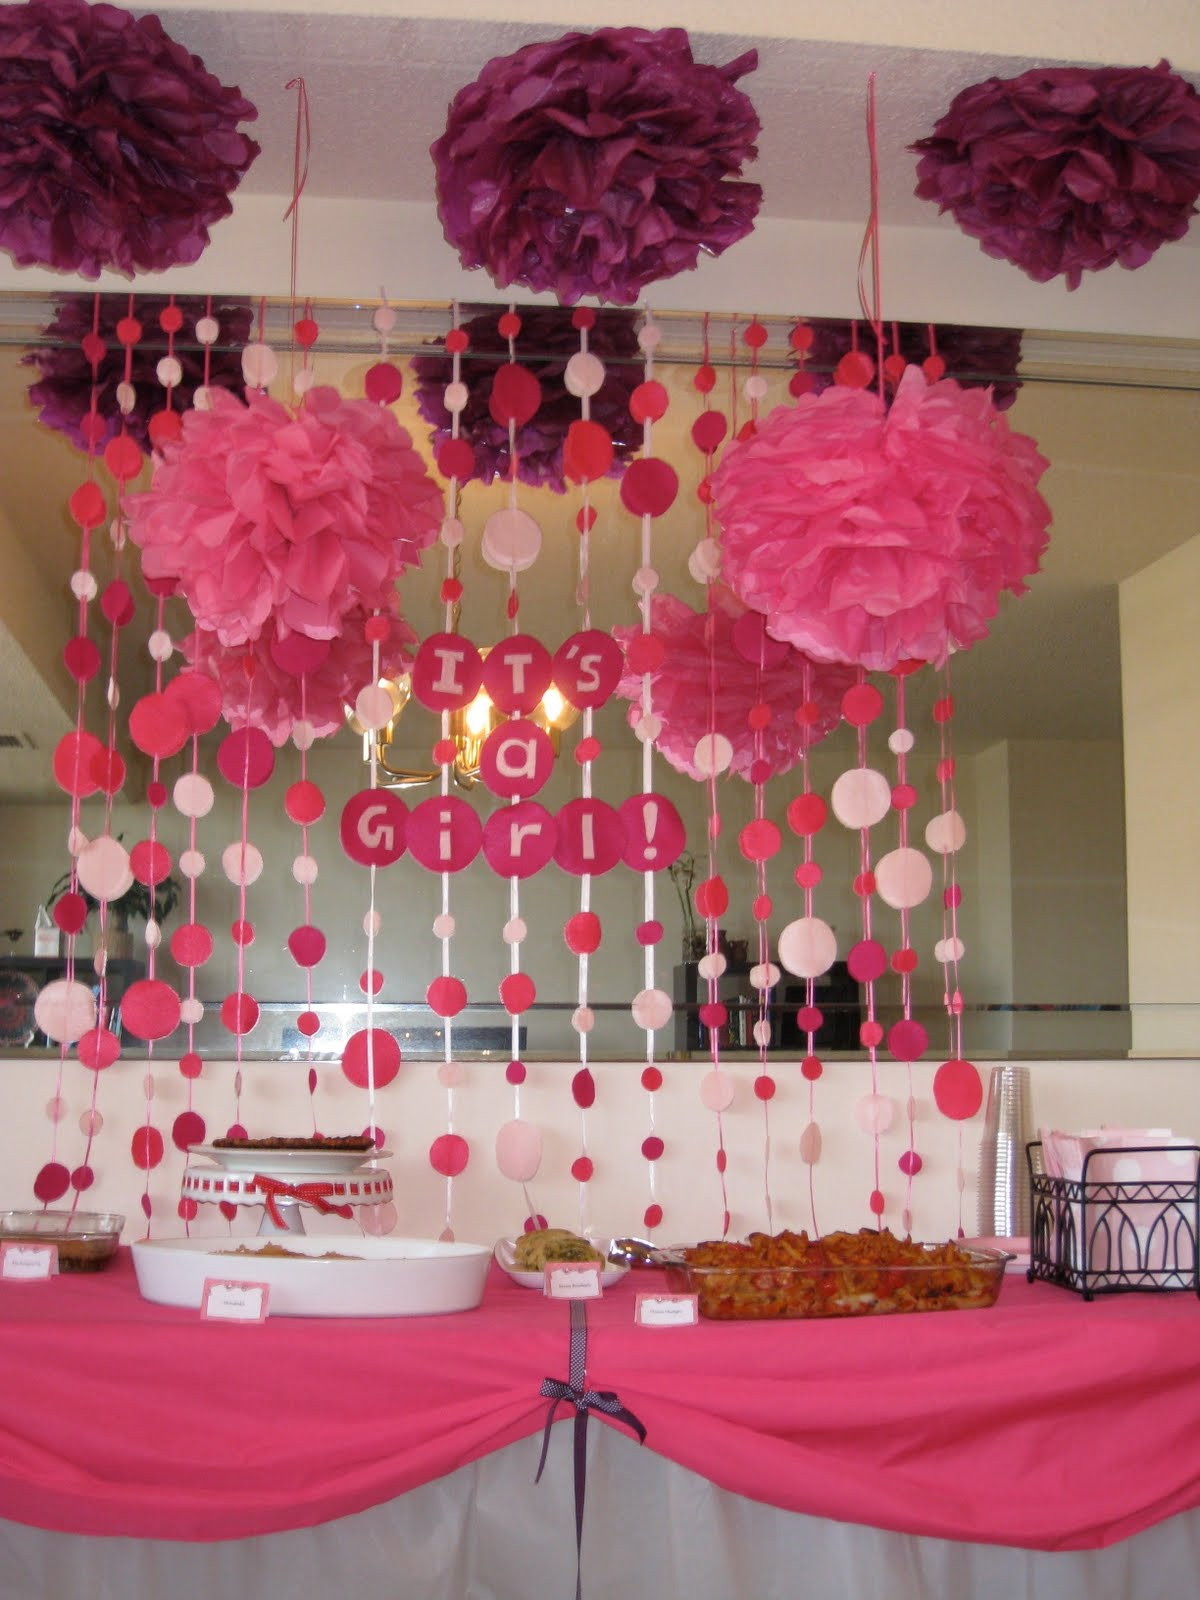 Baby Shower Ideas For A Girl Decorations
 Baby Shower Themes Ideas For Baby Boy And Baby Girl